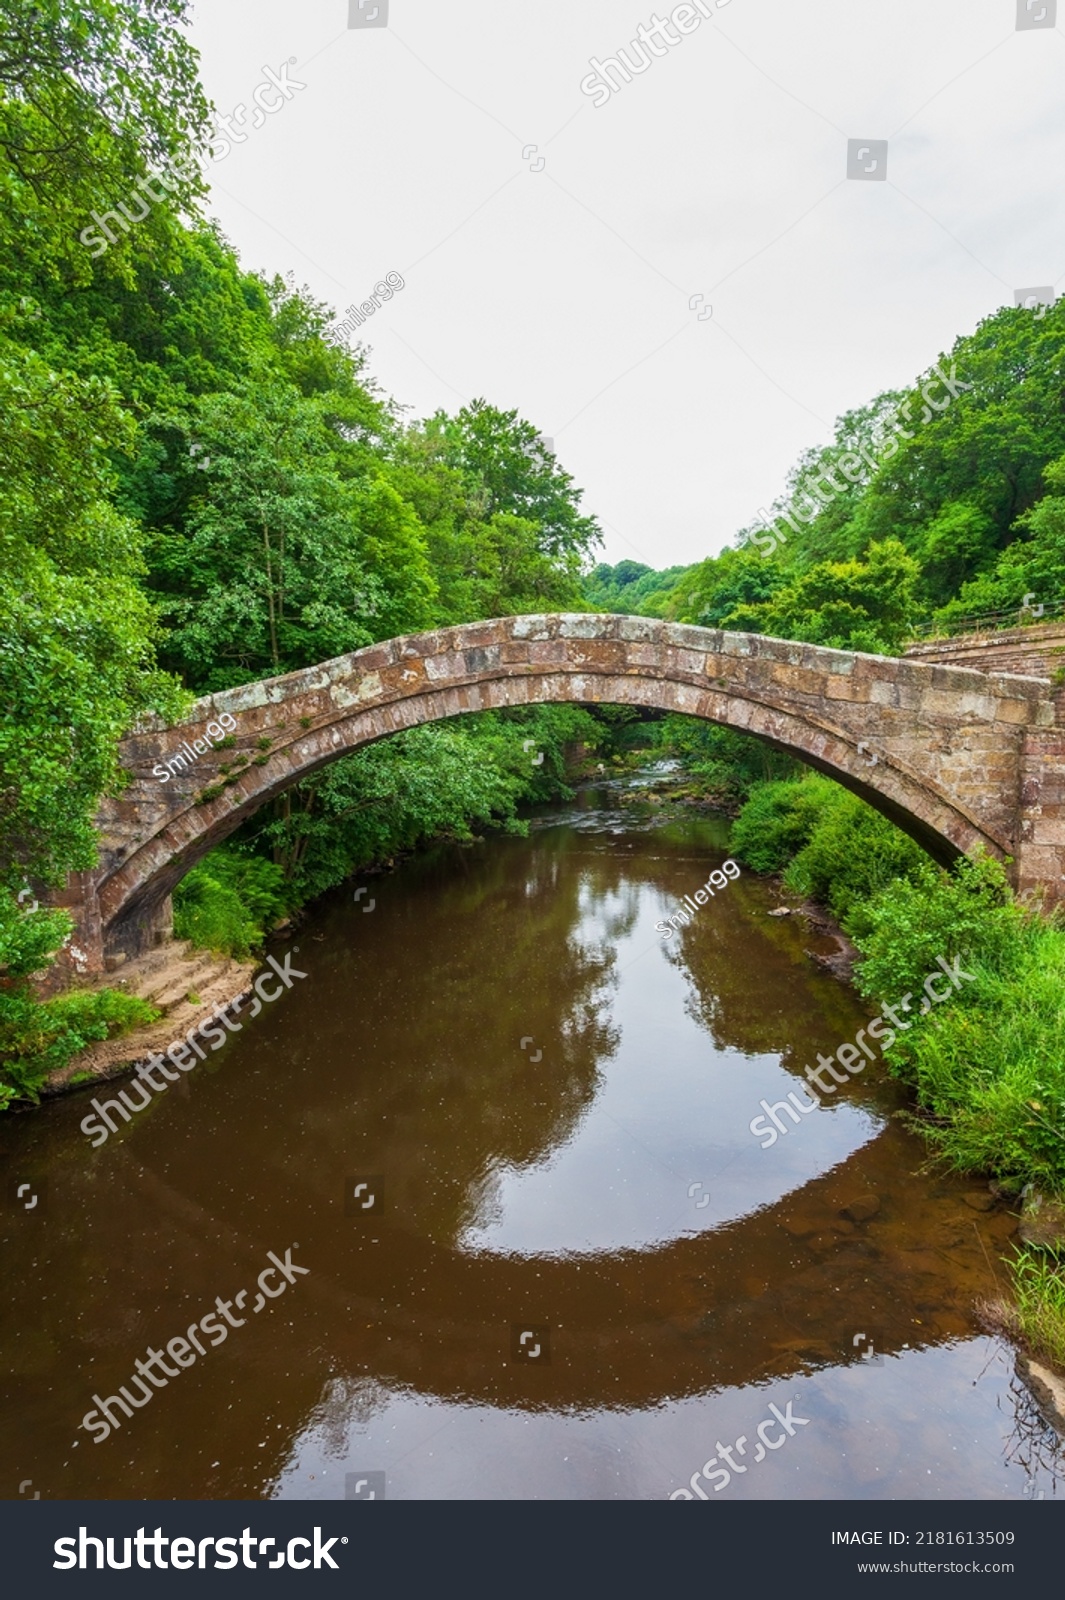 Beggar’s bridge, is a single track medieval packhorse bridge in Glaisdale, Yorkshire. Built by Tom Ferris in 1619, parts are from a former bridge of the 14th century. Single arch over the river Esk. #2181613509